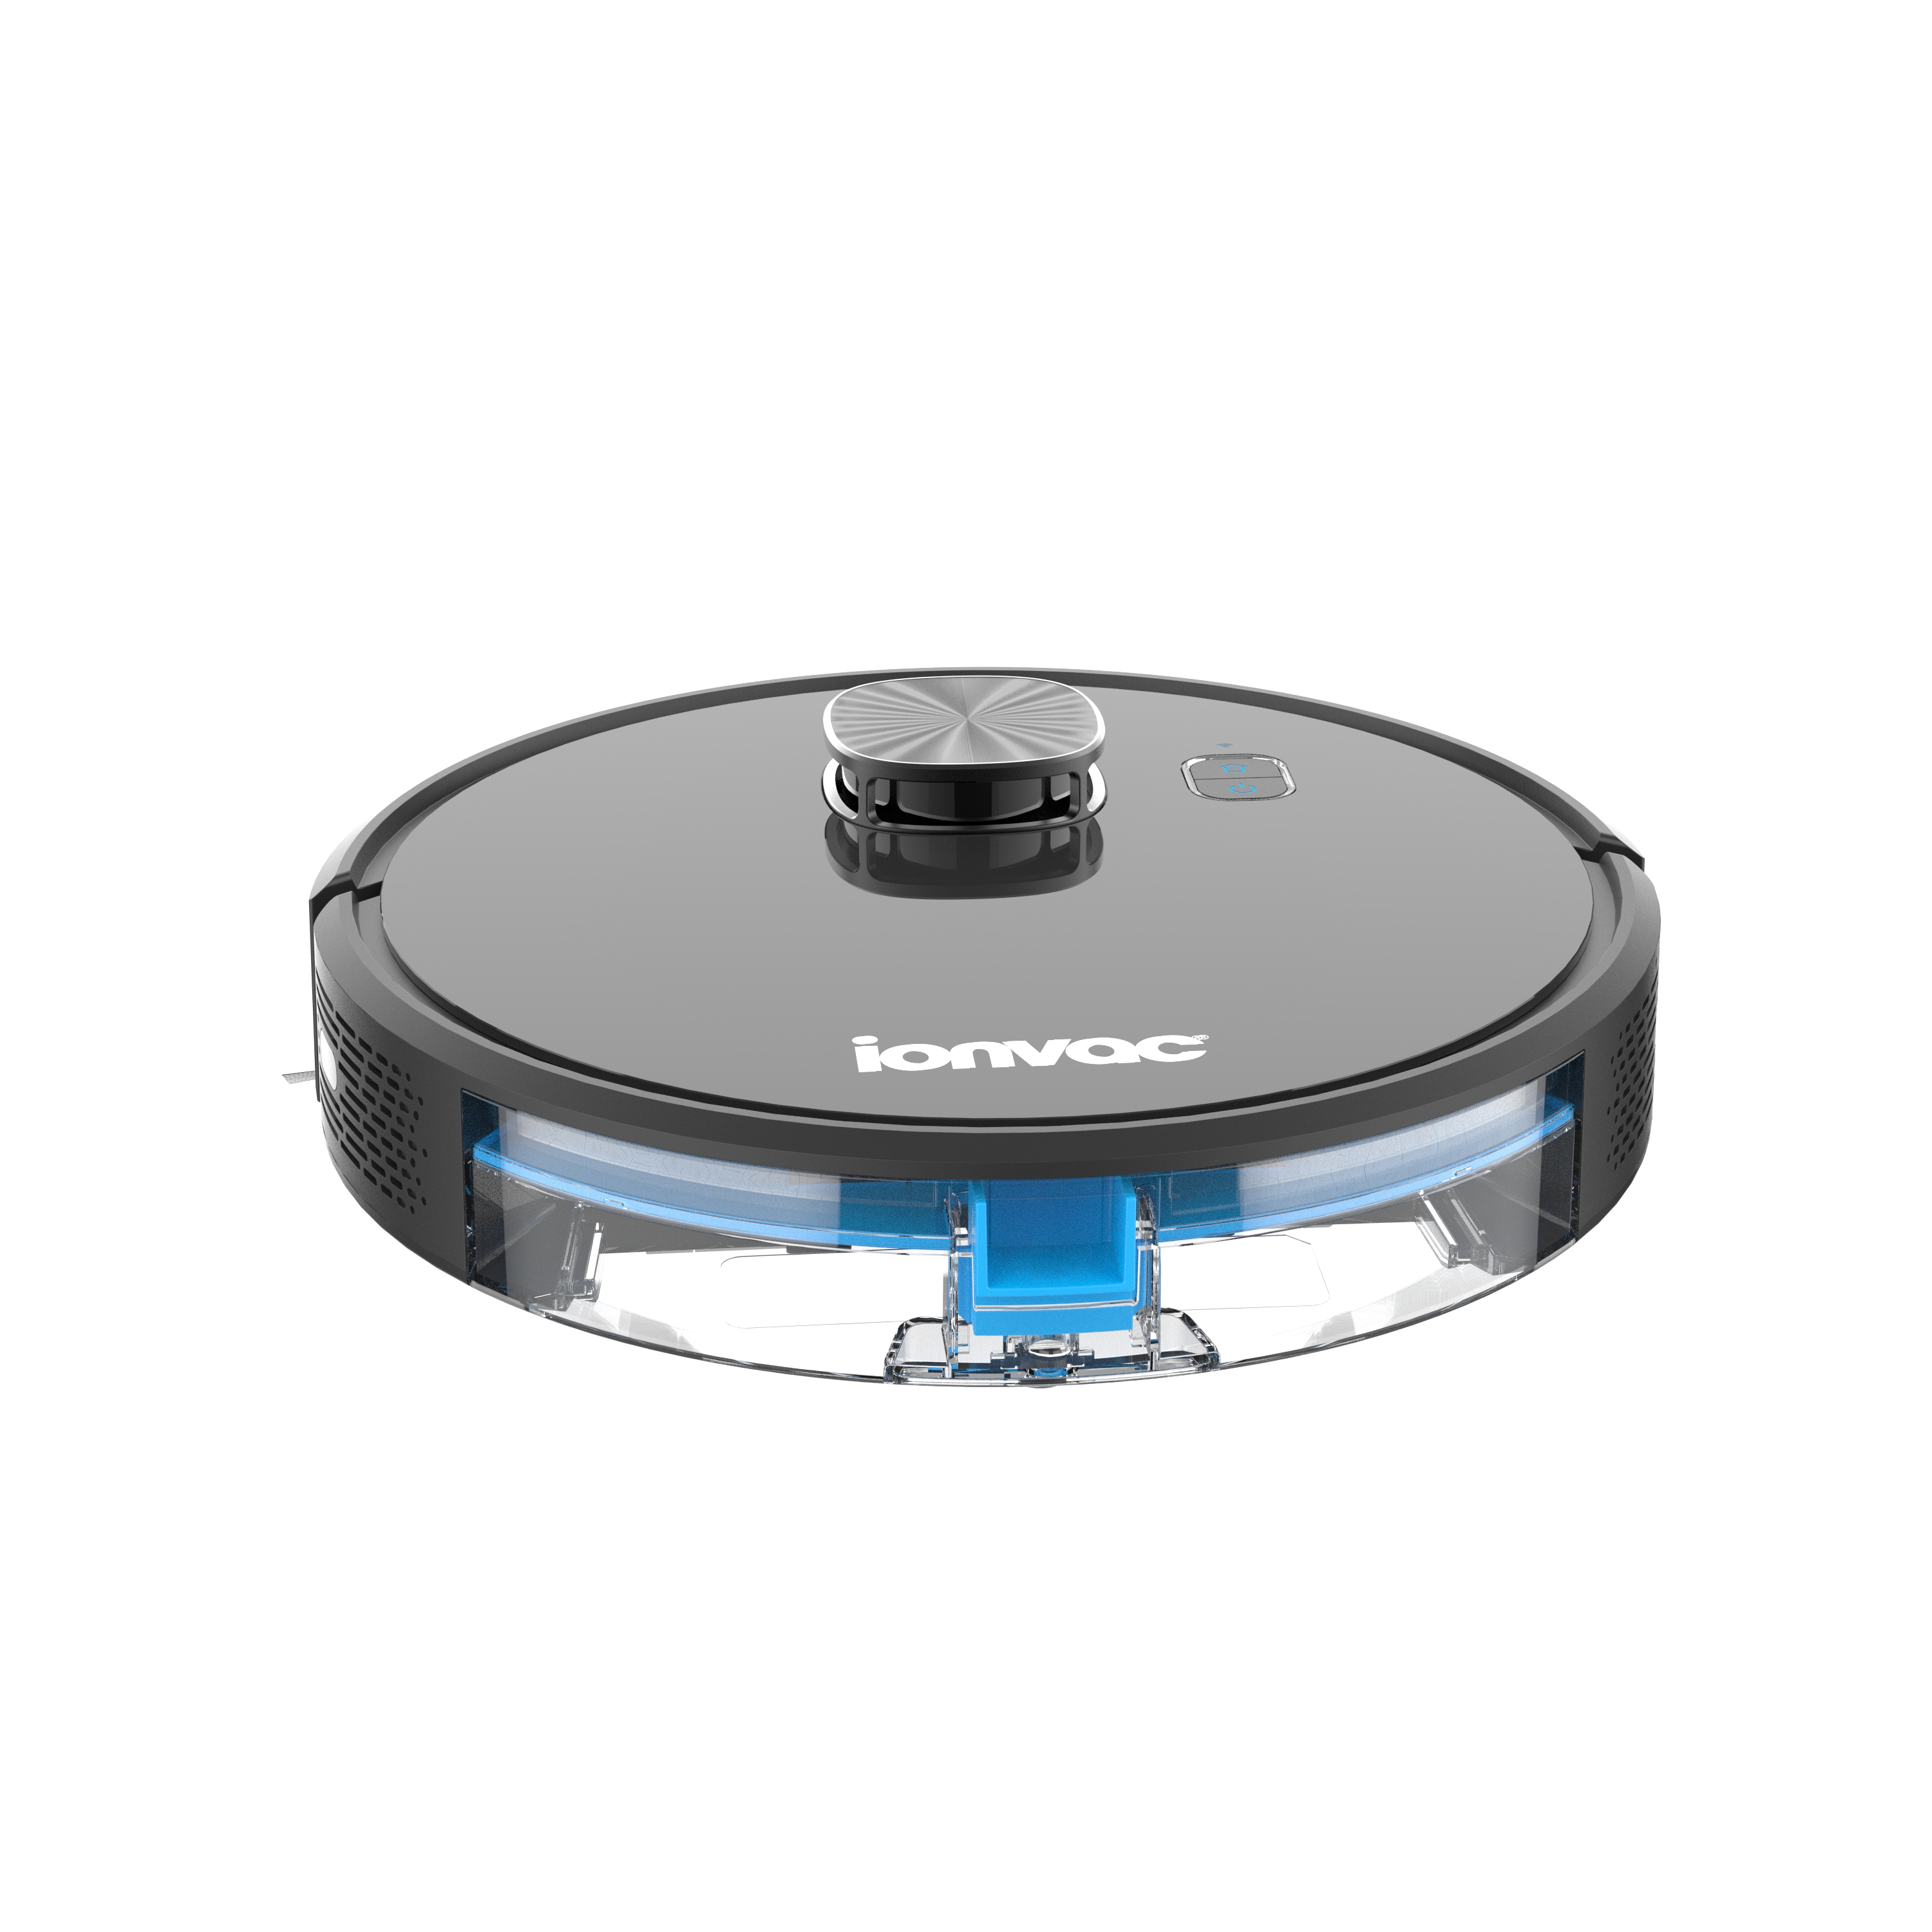 Cecotec Conga 4090 - the smart robot vacuum and mop for pet owners 